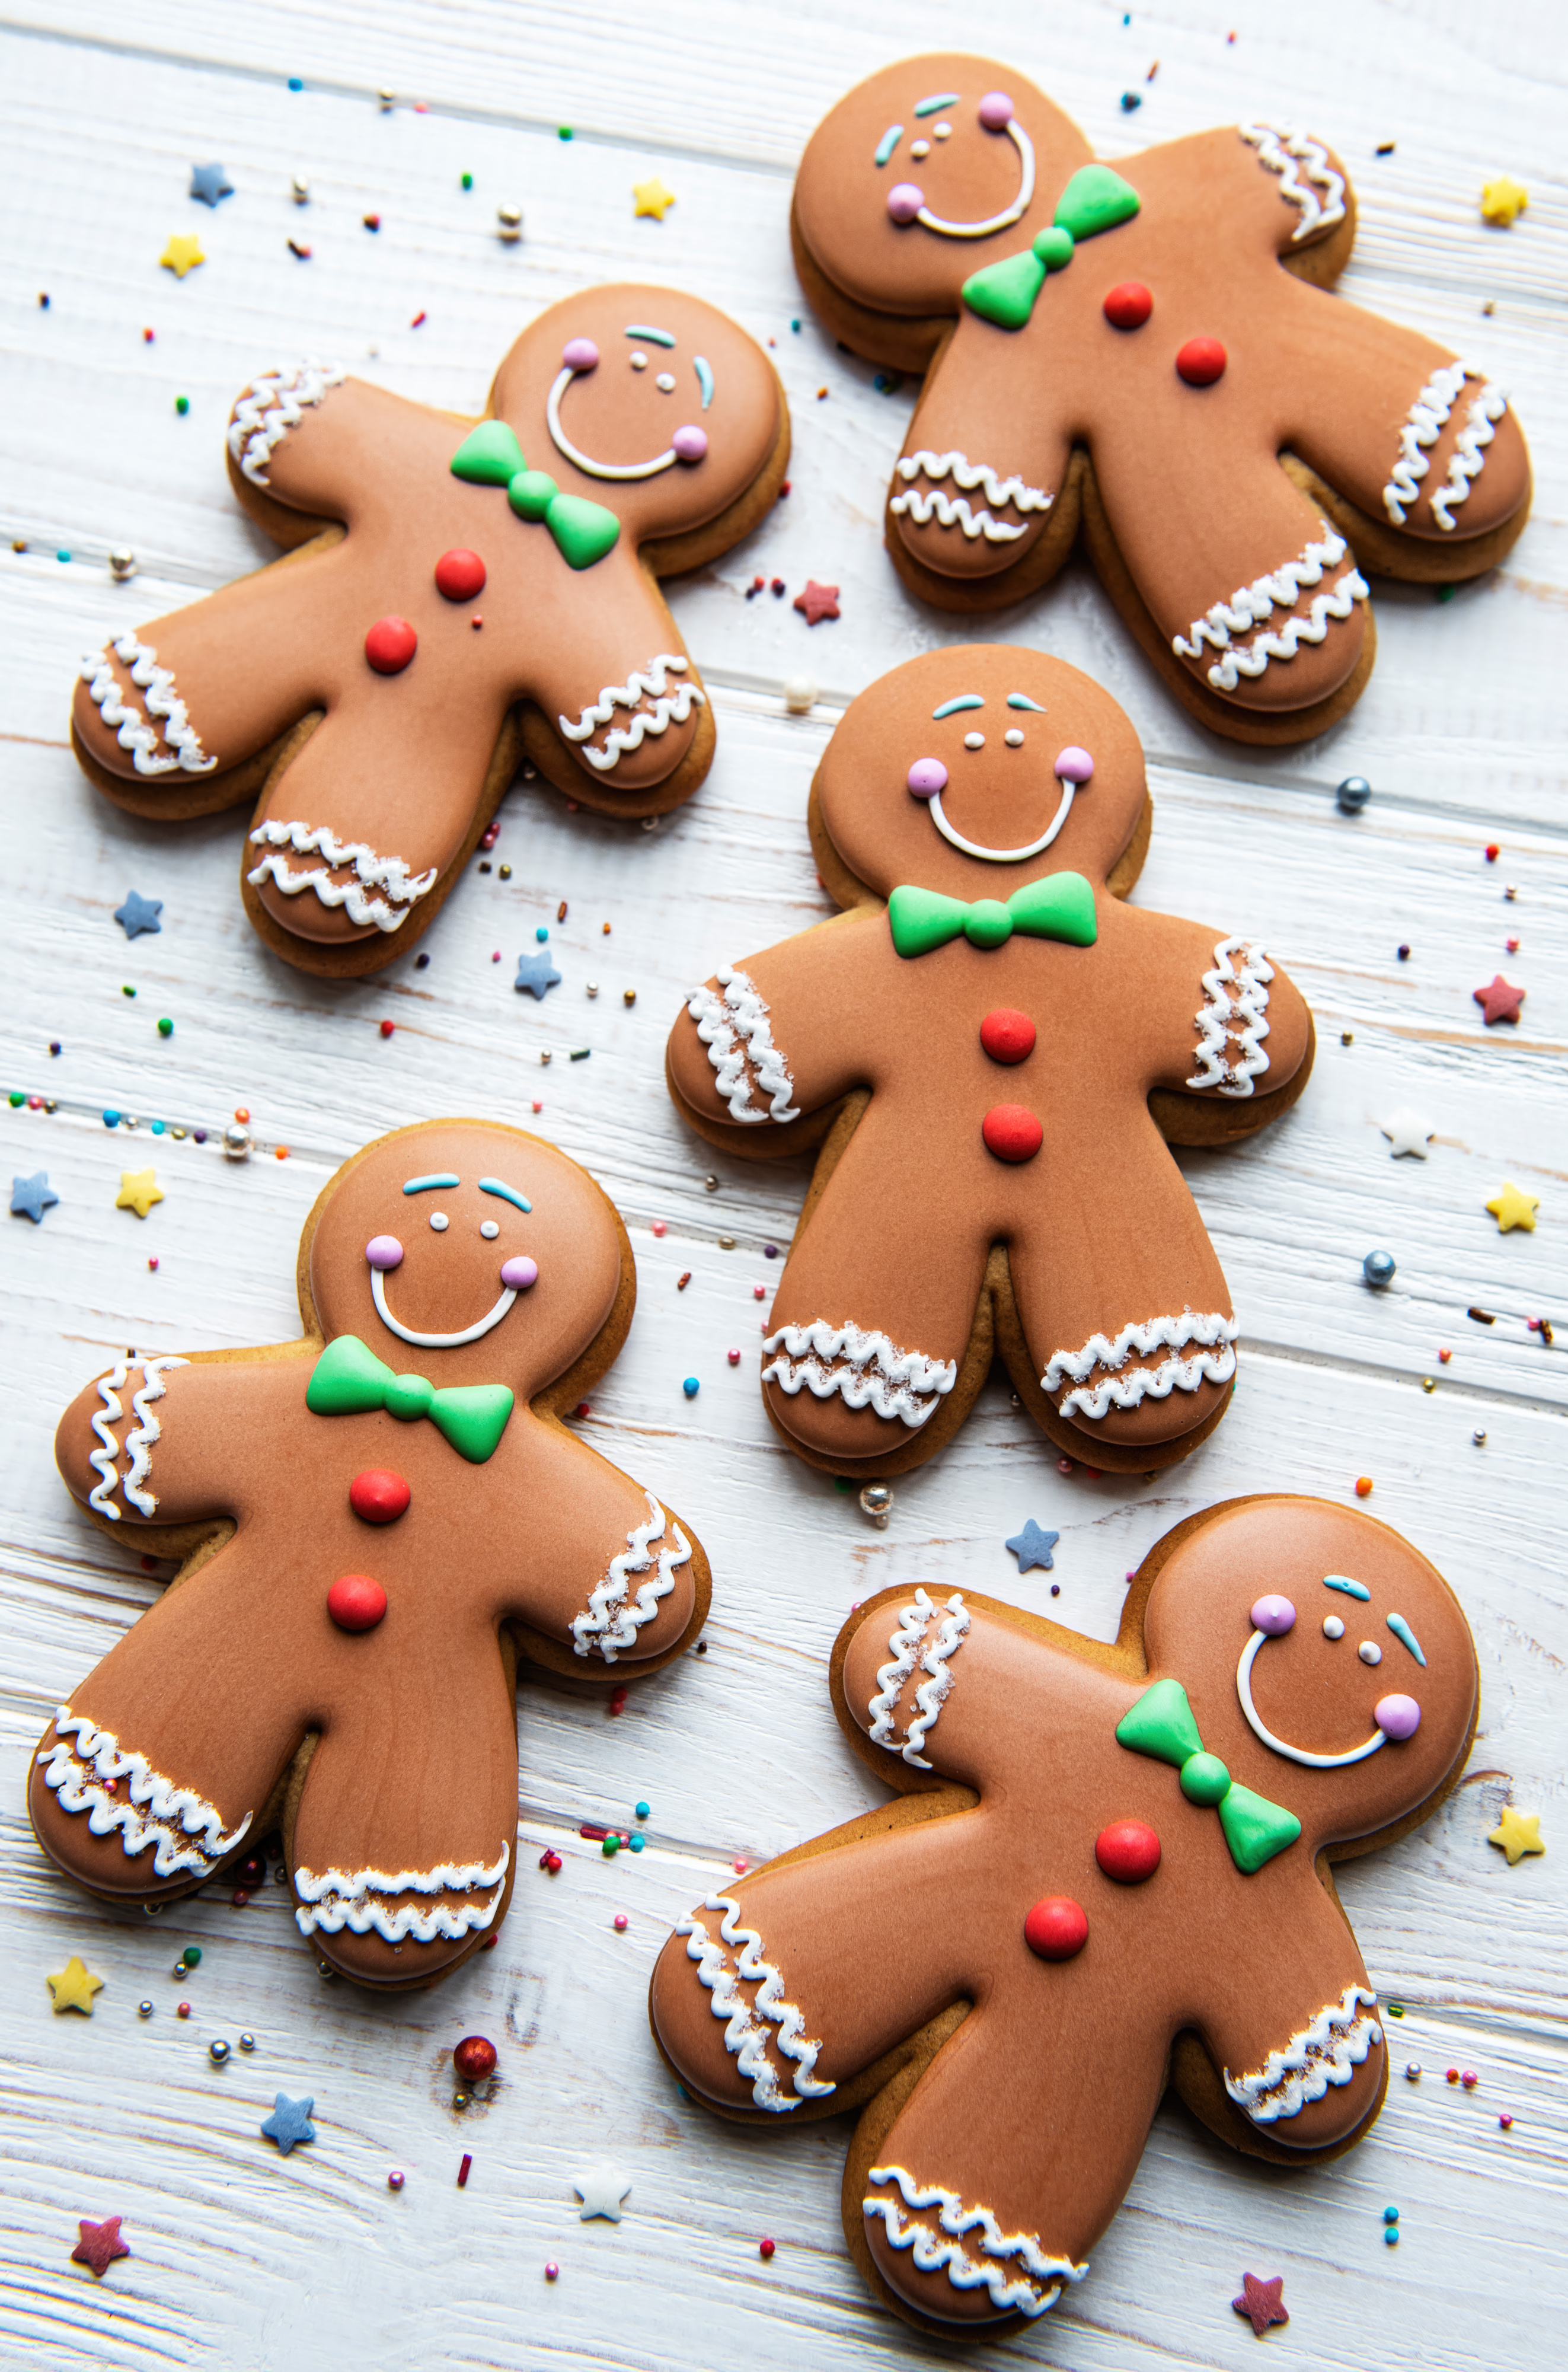 Homemade Christmas gingerbread men cookies on a white wooden background